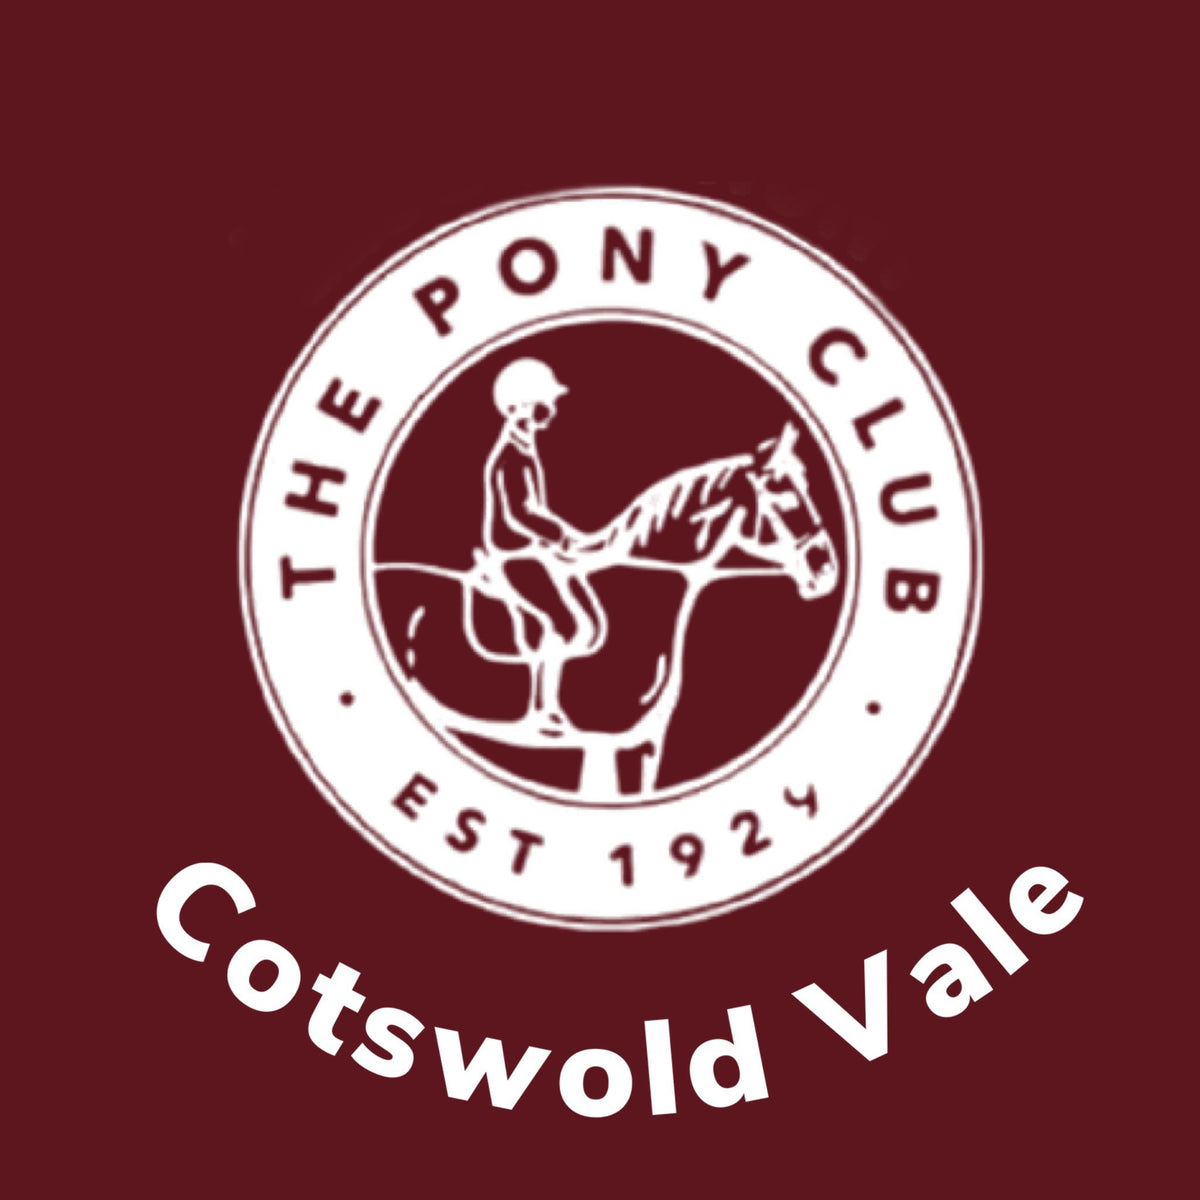 Cotswold Vale Pony Club